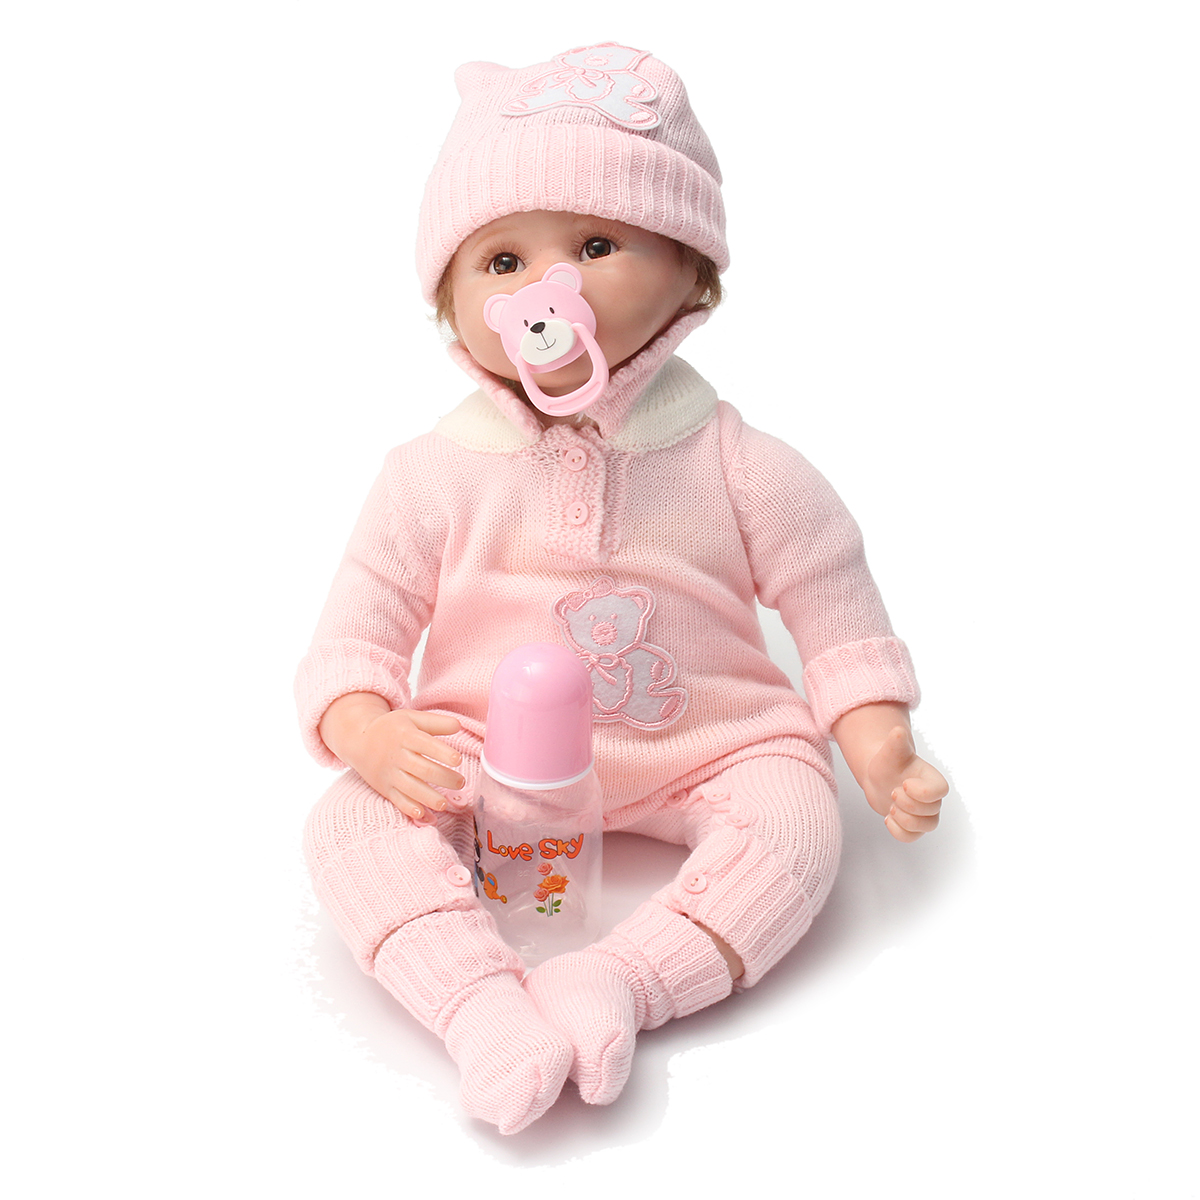 Silicone Reborn Baby Doll Lifelike Cute Toys Girl For ...